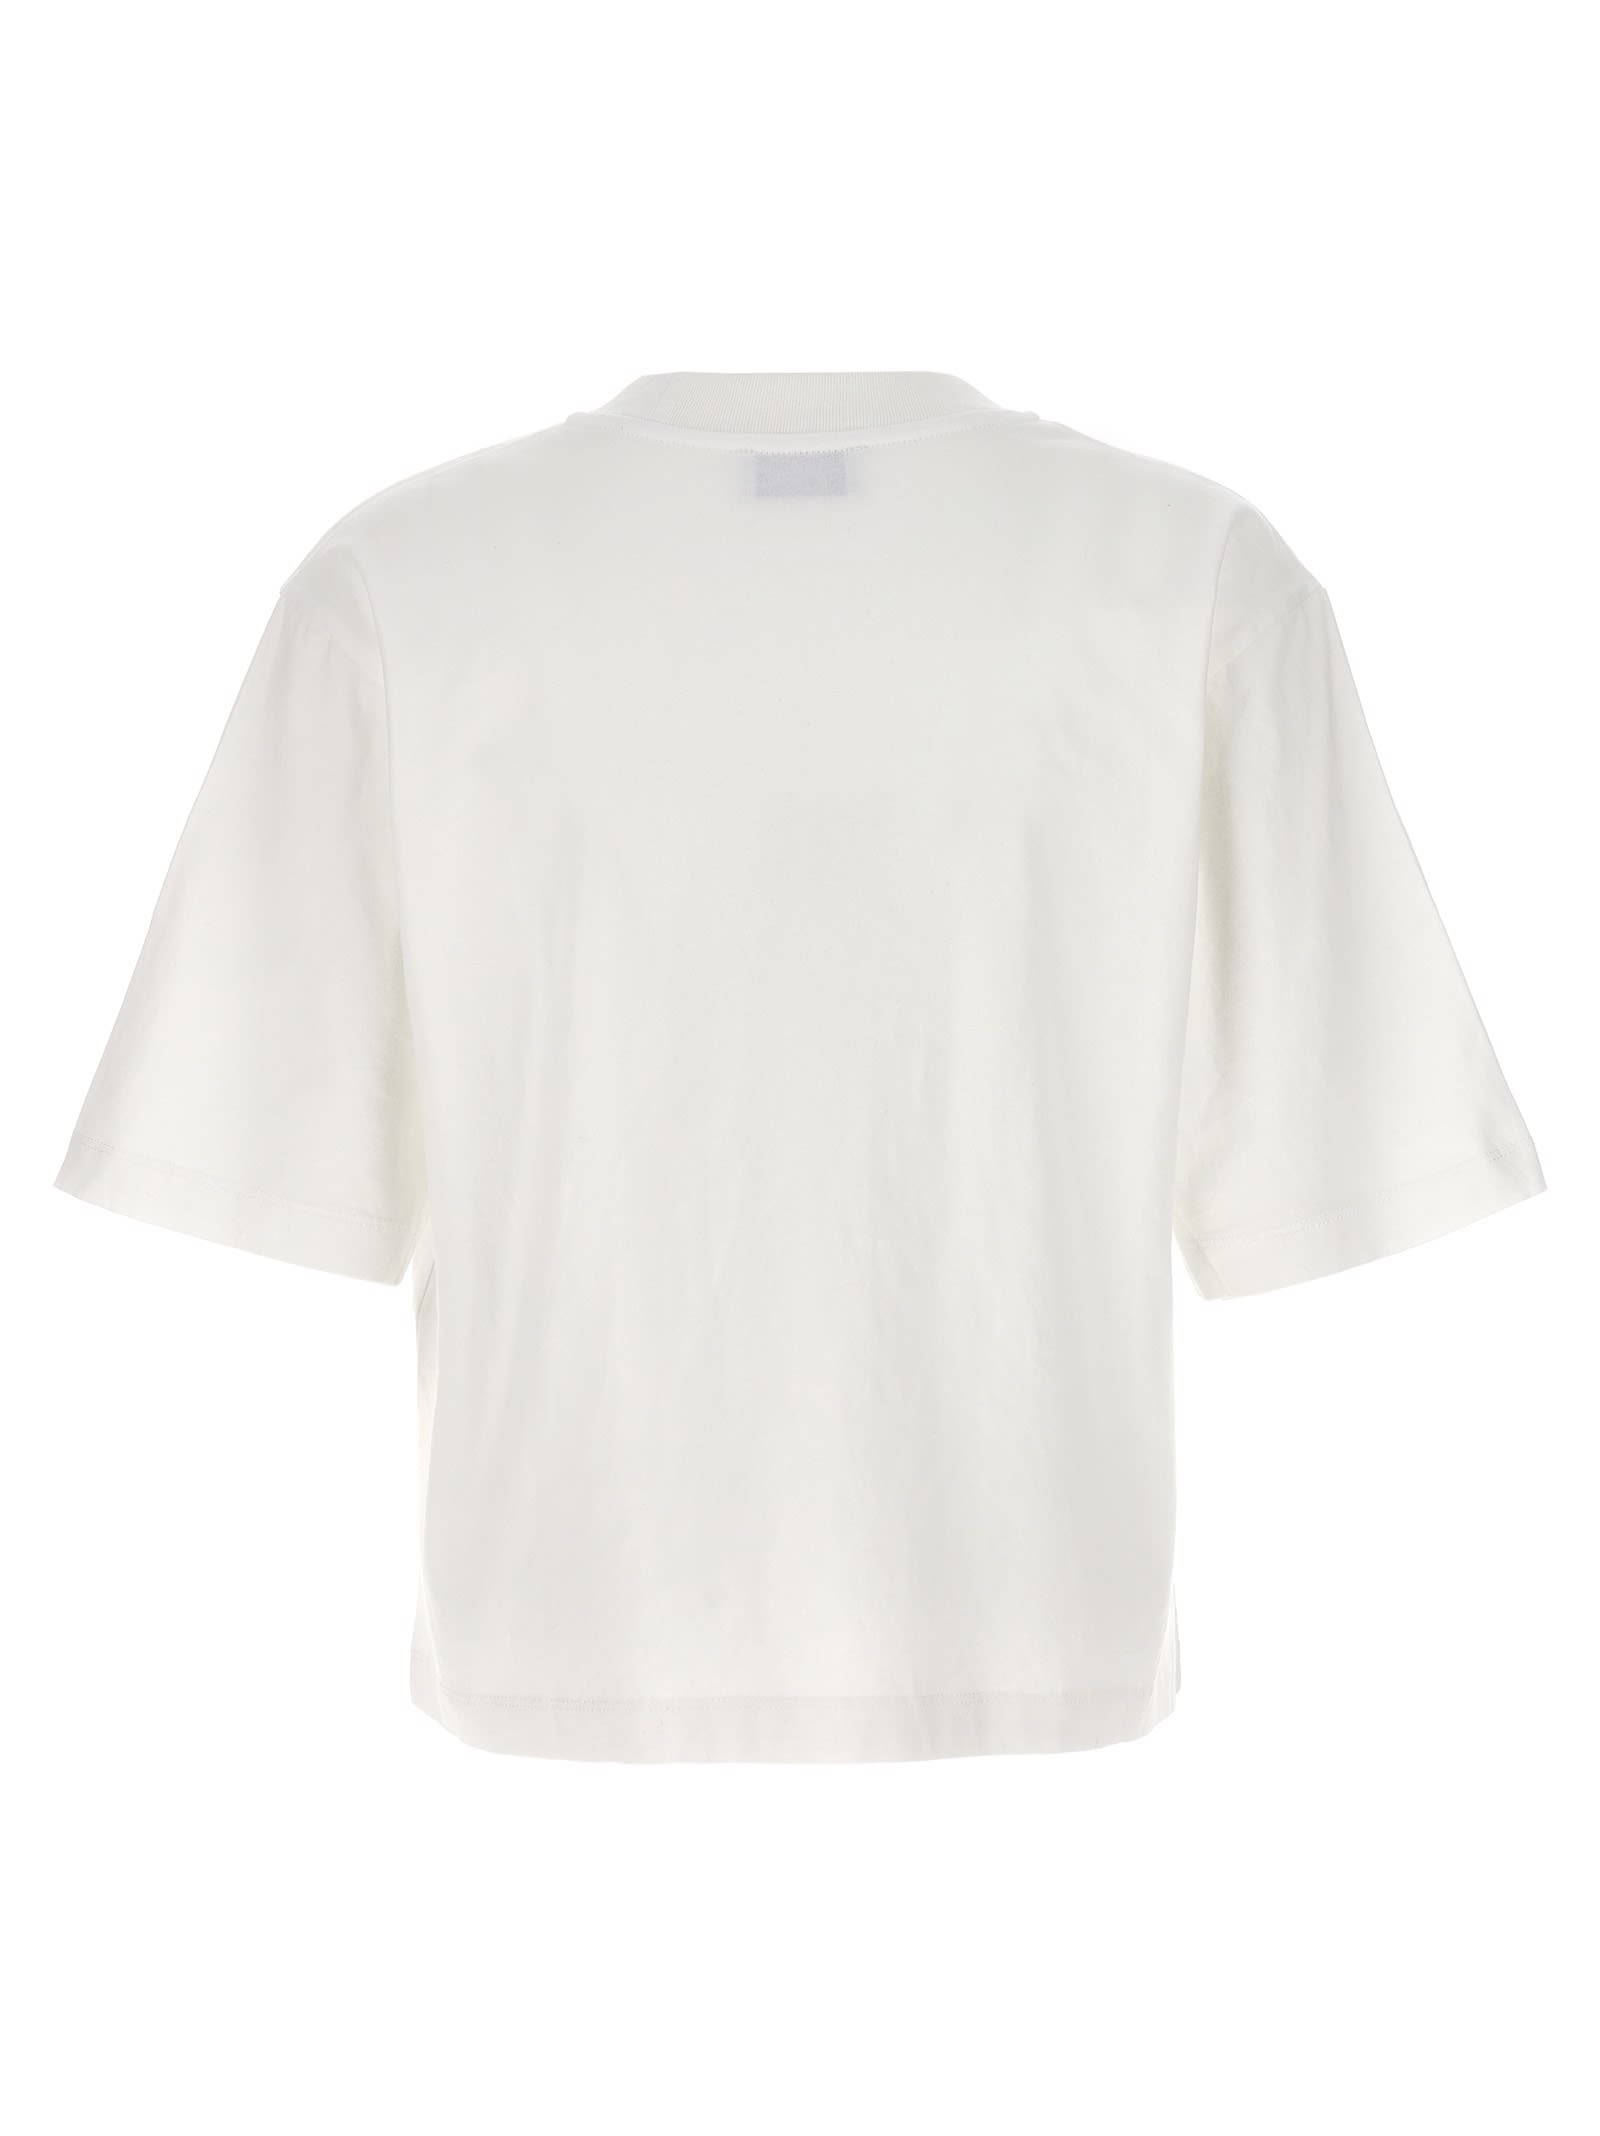 Shop Off-white No Offence T-shirt In White